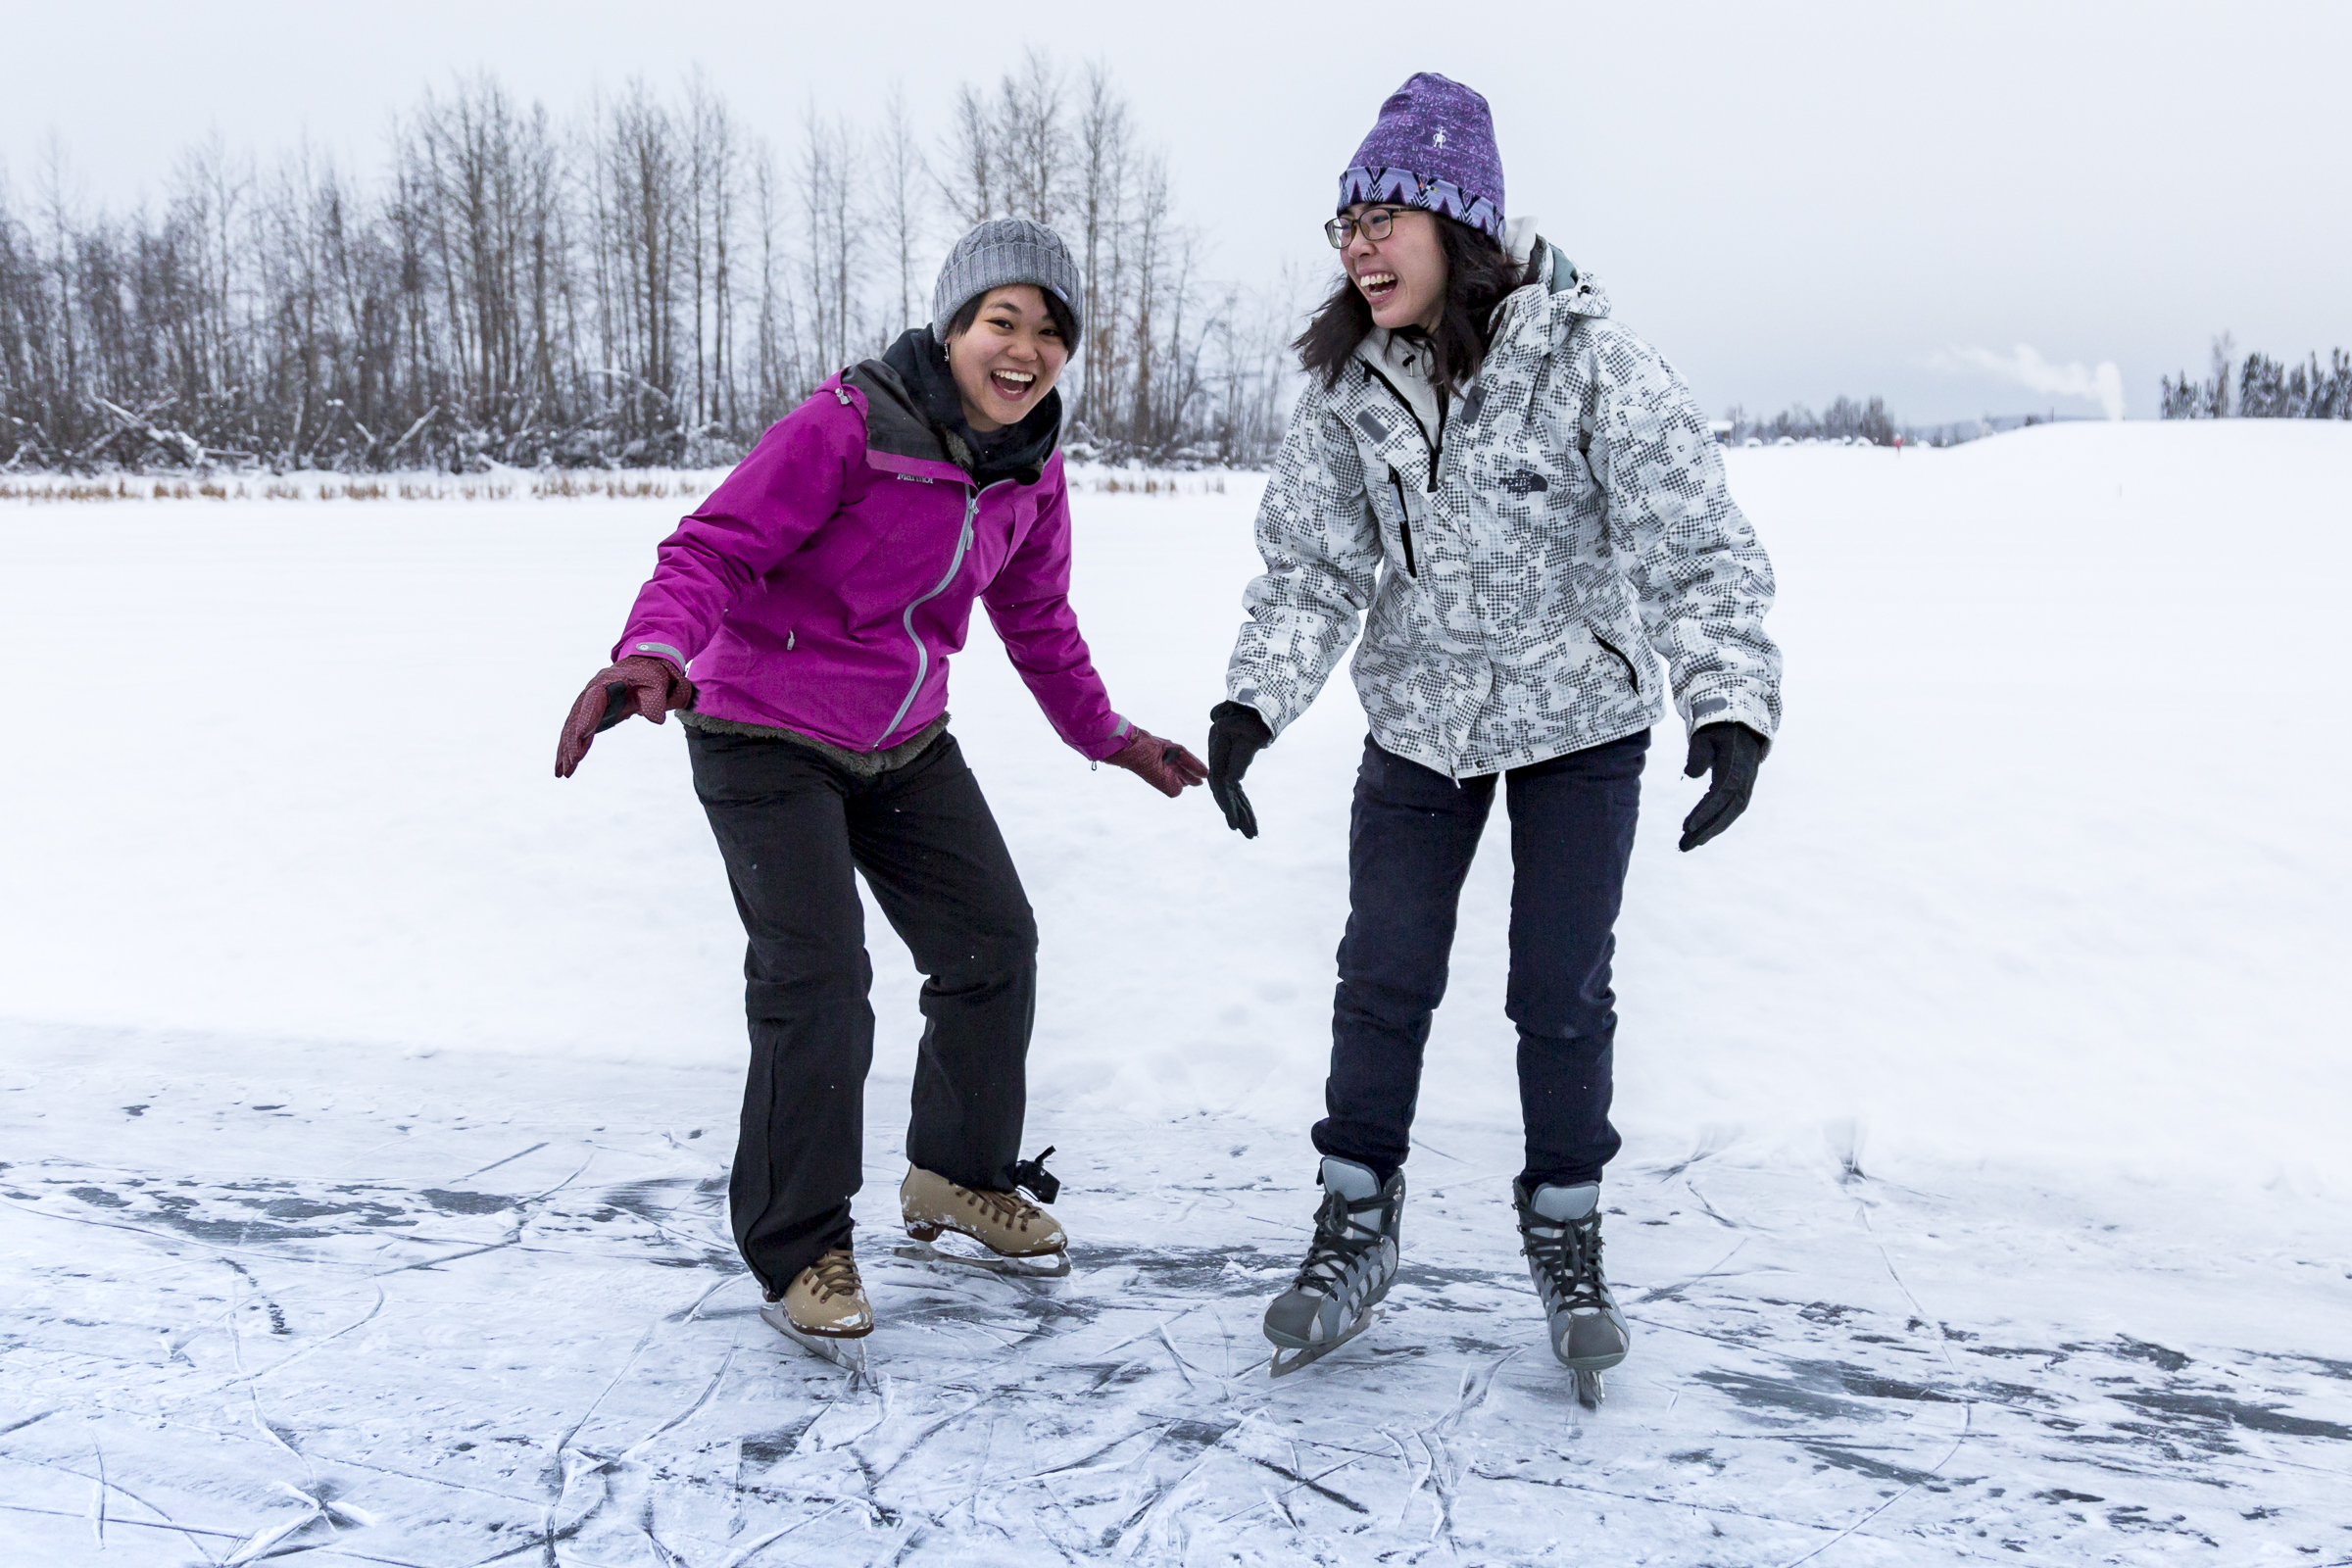 Kasugahara Miki (left) and Natalie Tan Rei Hsi (right) ice skate on the frozen Tanana Lake with Nanook Recreation on Sunday, February 3rd, 2019.